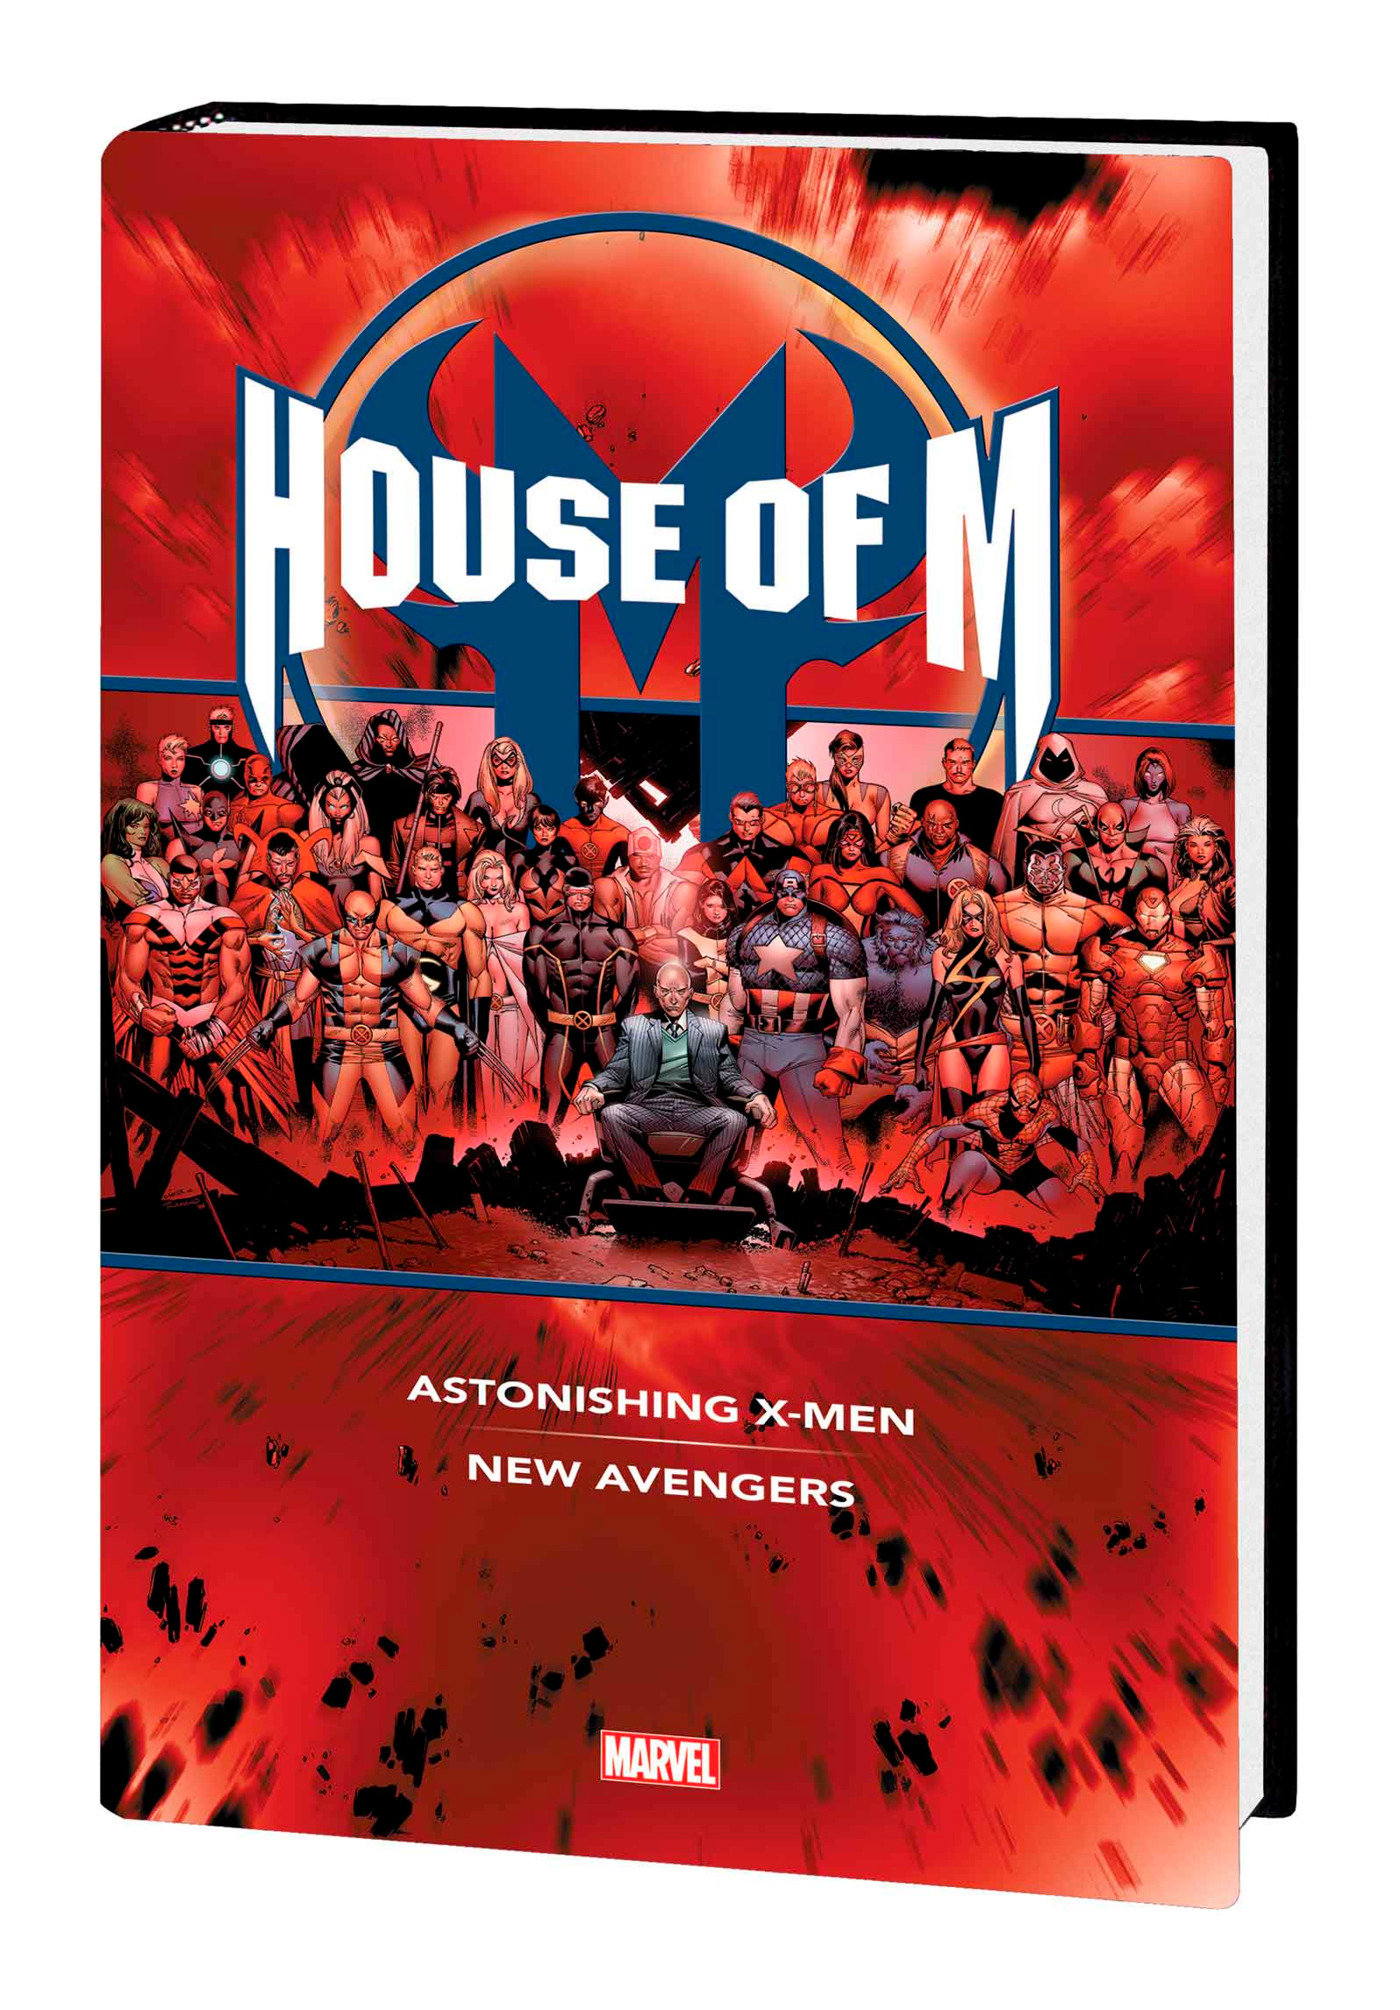 House of M Omnibus Hardcover Coipel Cover